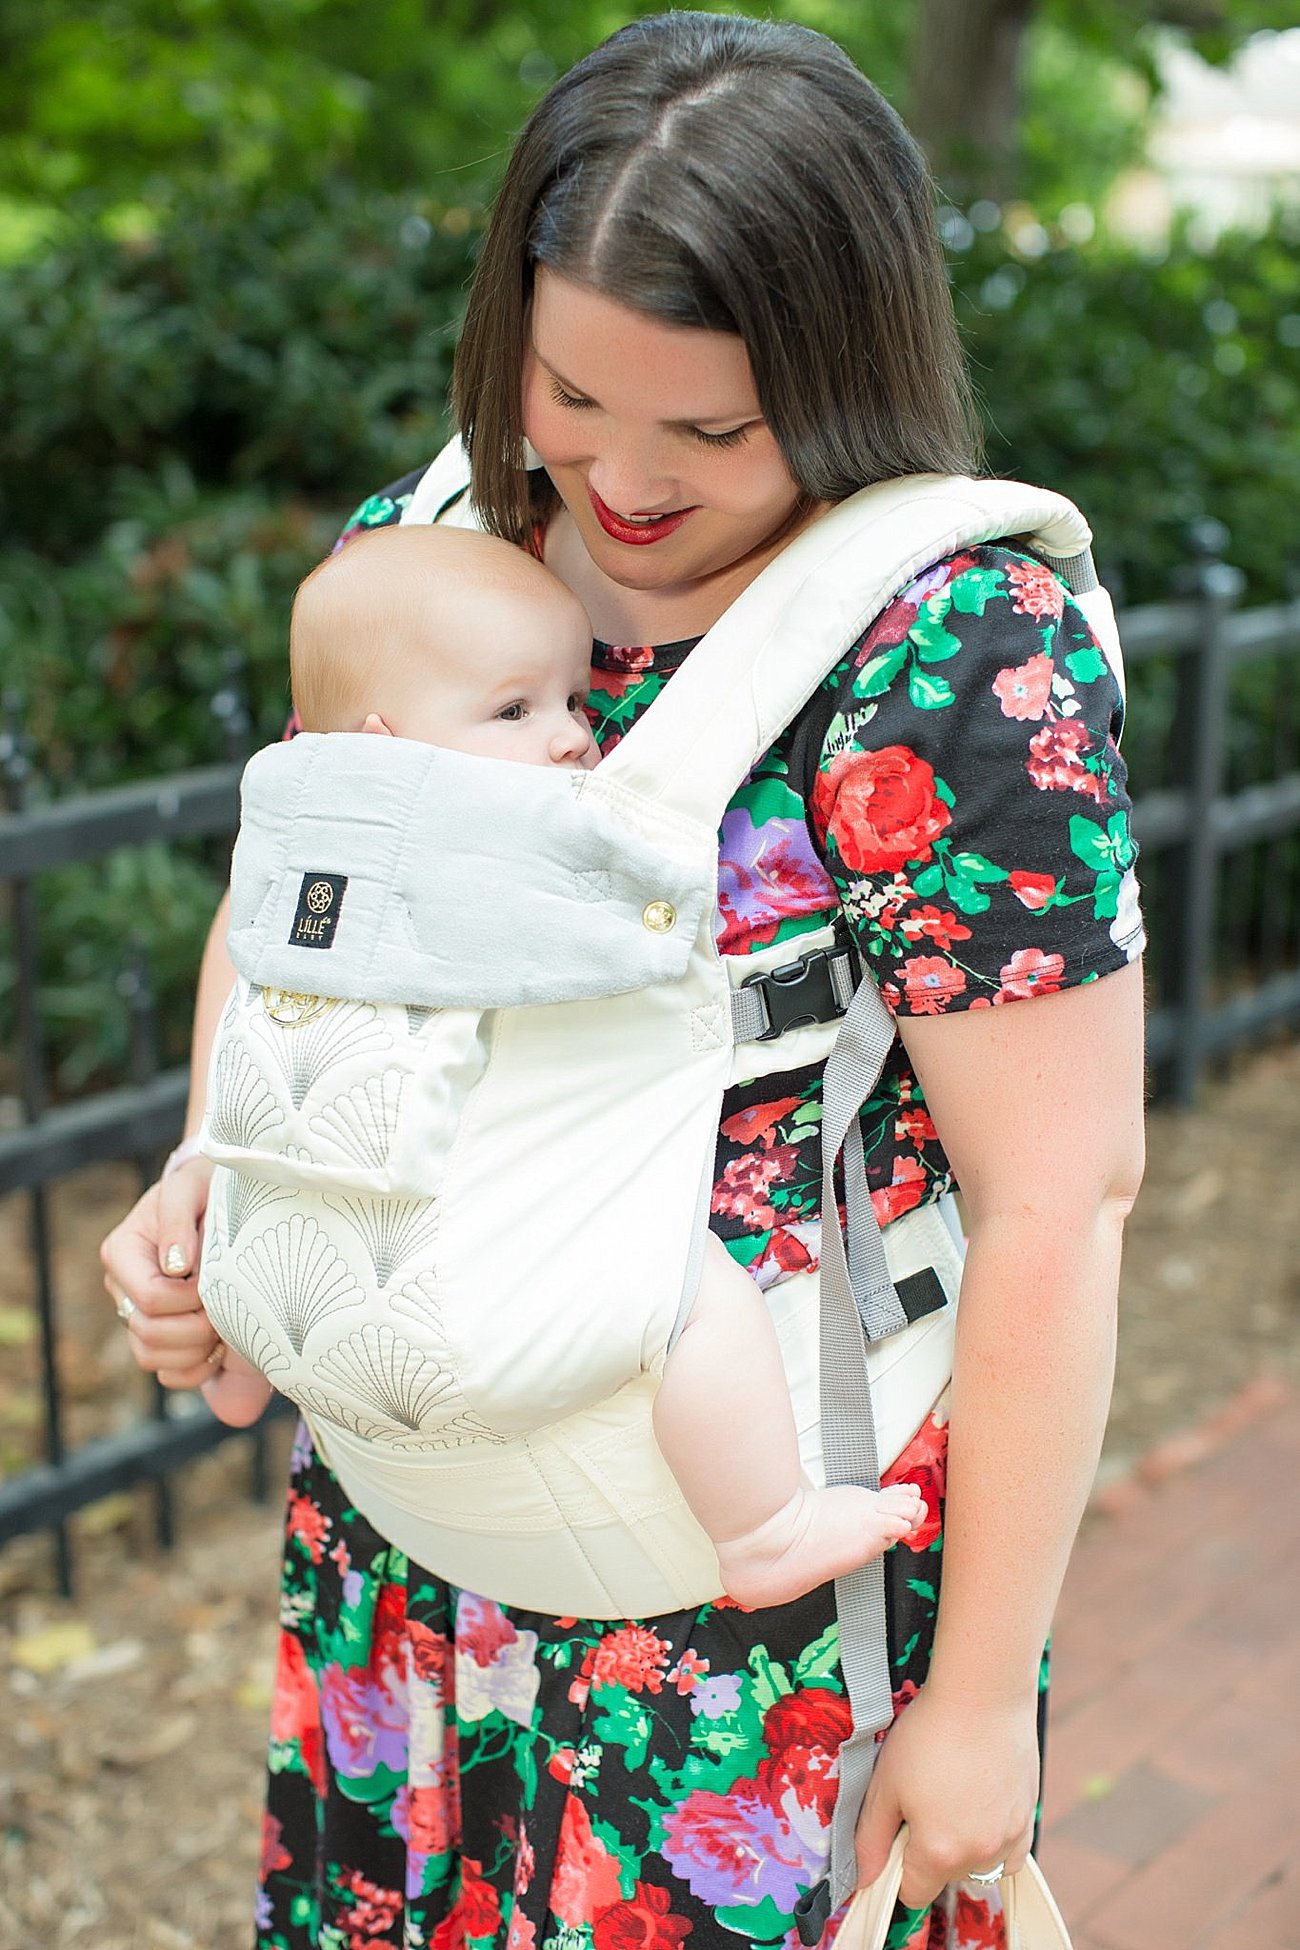 LulaRoe floral Amelia dress, Lillebaby Complete Embossed Luxe carrier in Brilliance, The Root Collective shoes, Kalencom "Berlin" Diaper Bag | North Carolina Fashion Blogger (3)